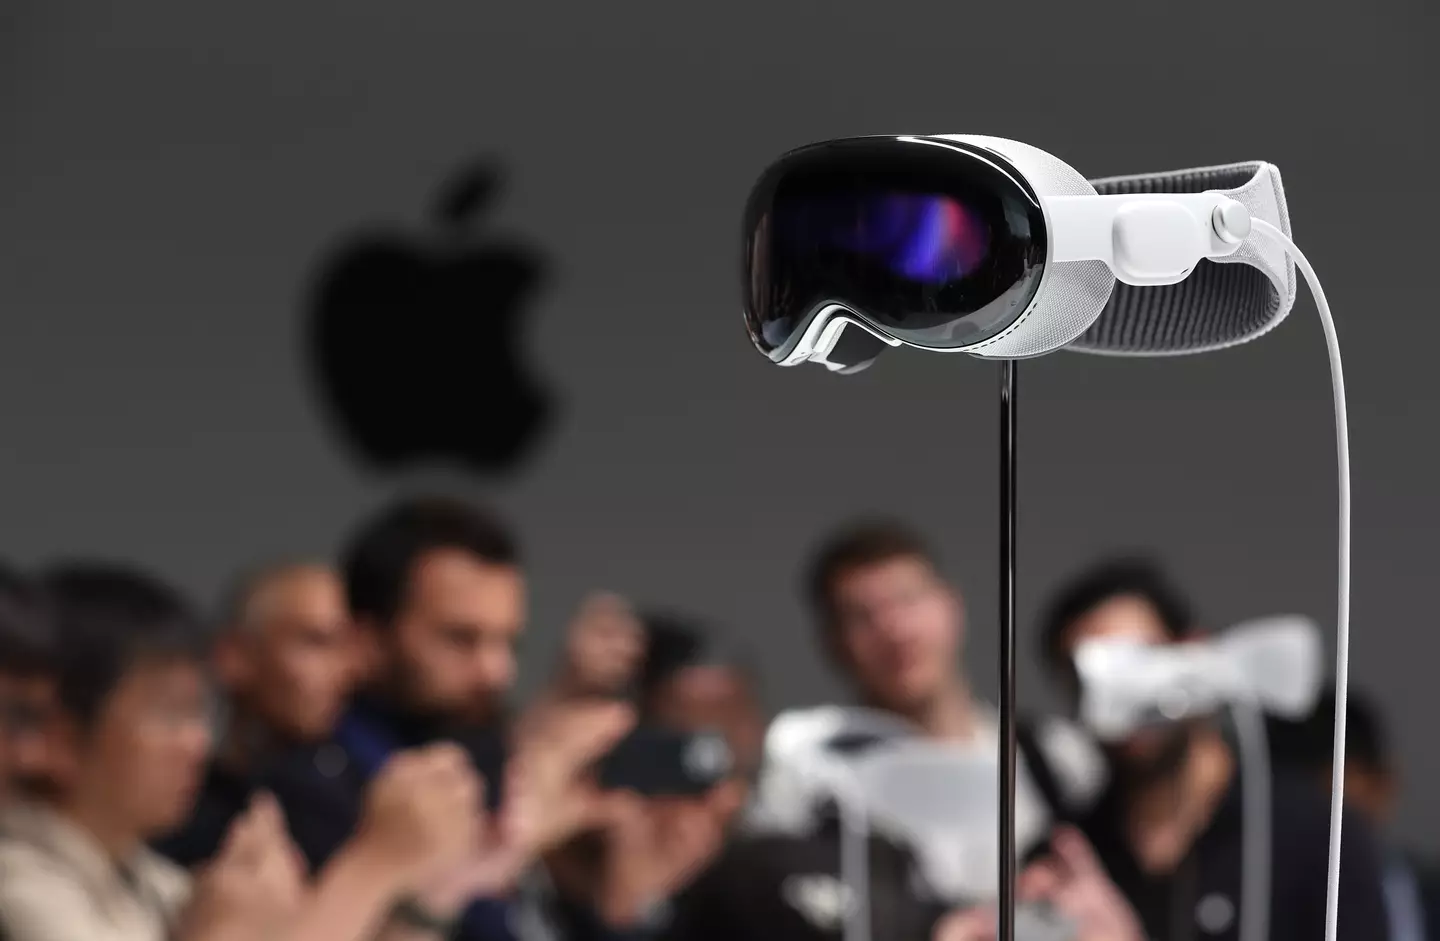 The Apple Vision Pro headset has finally got a release date.